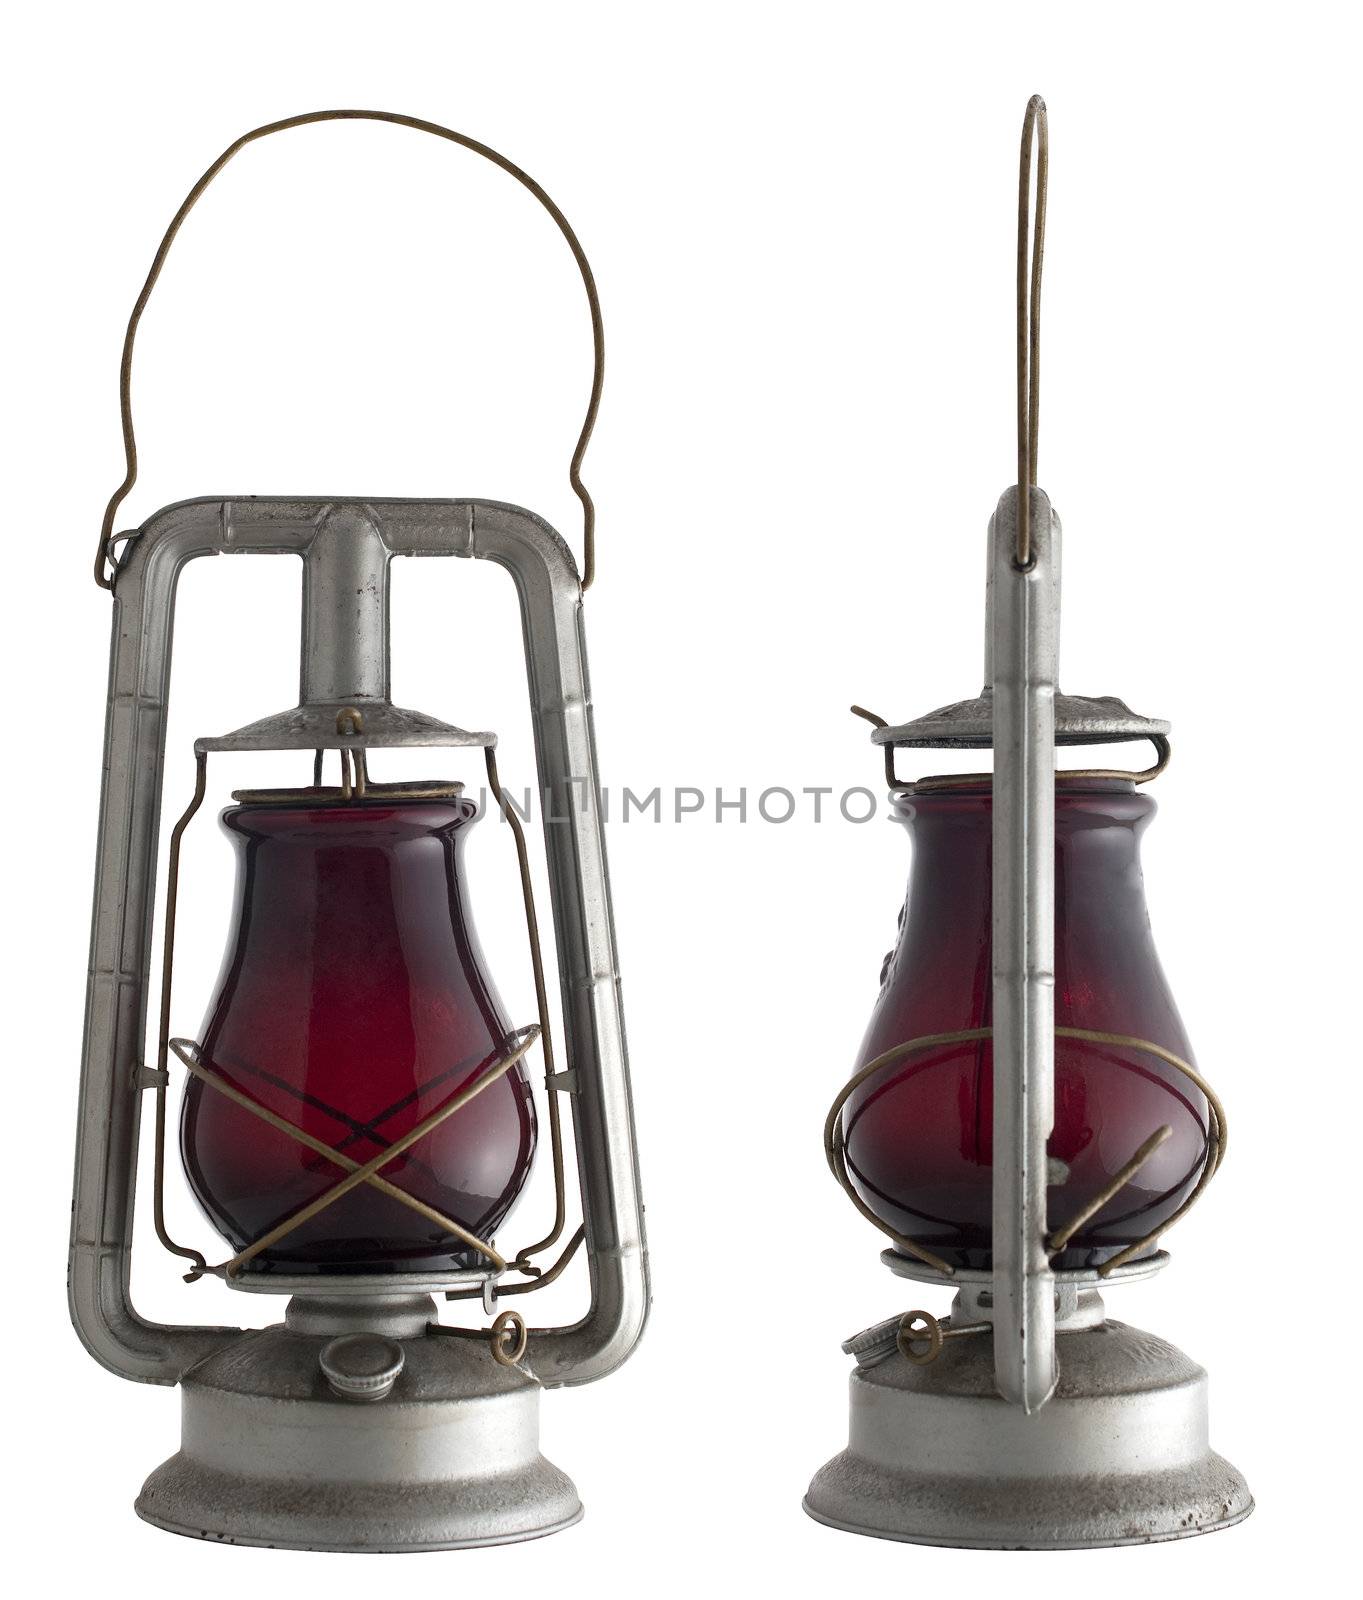 Old oil lamp isolated of the background and in diferent views.